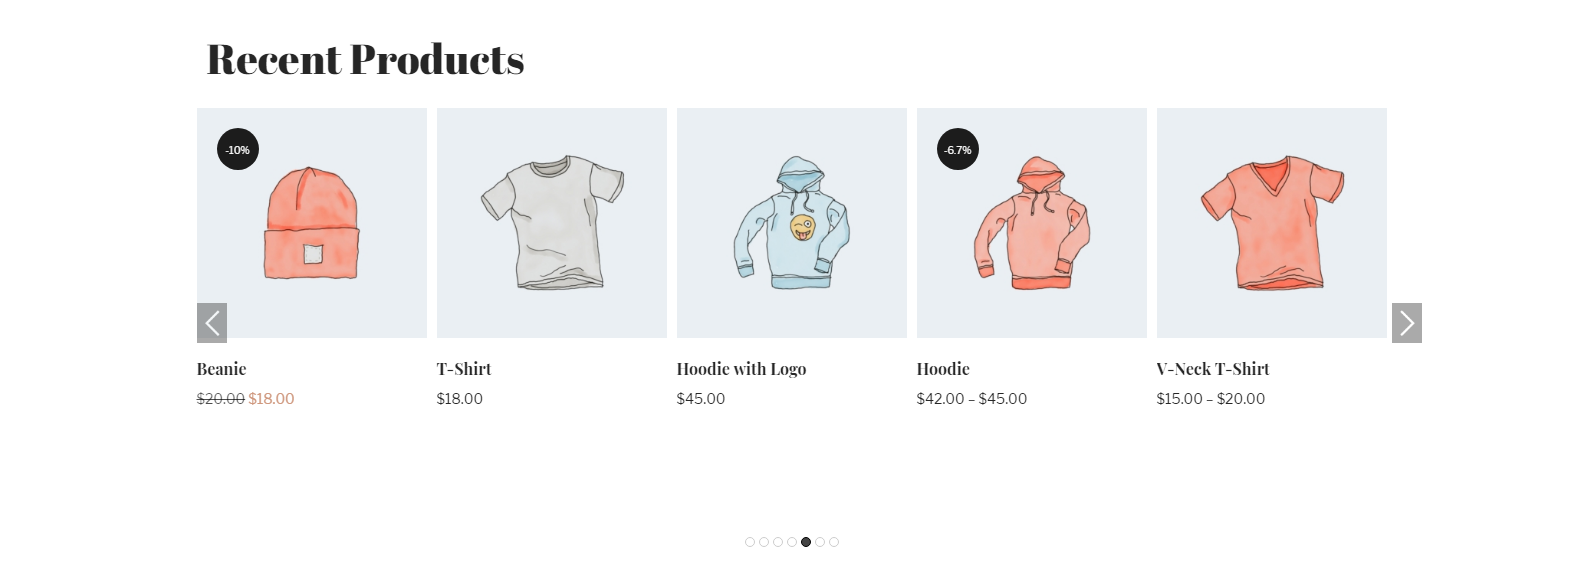 WooCommerce Most Recent Products in carousel view